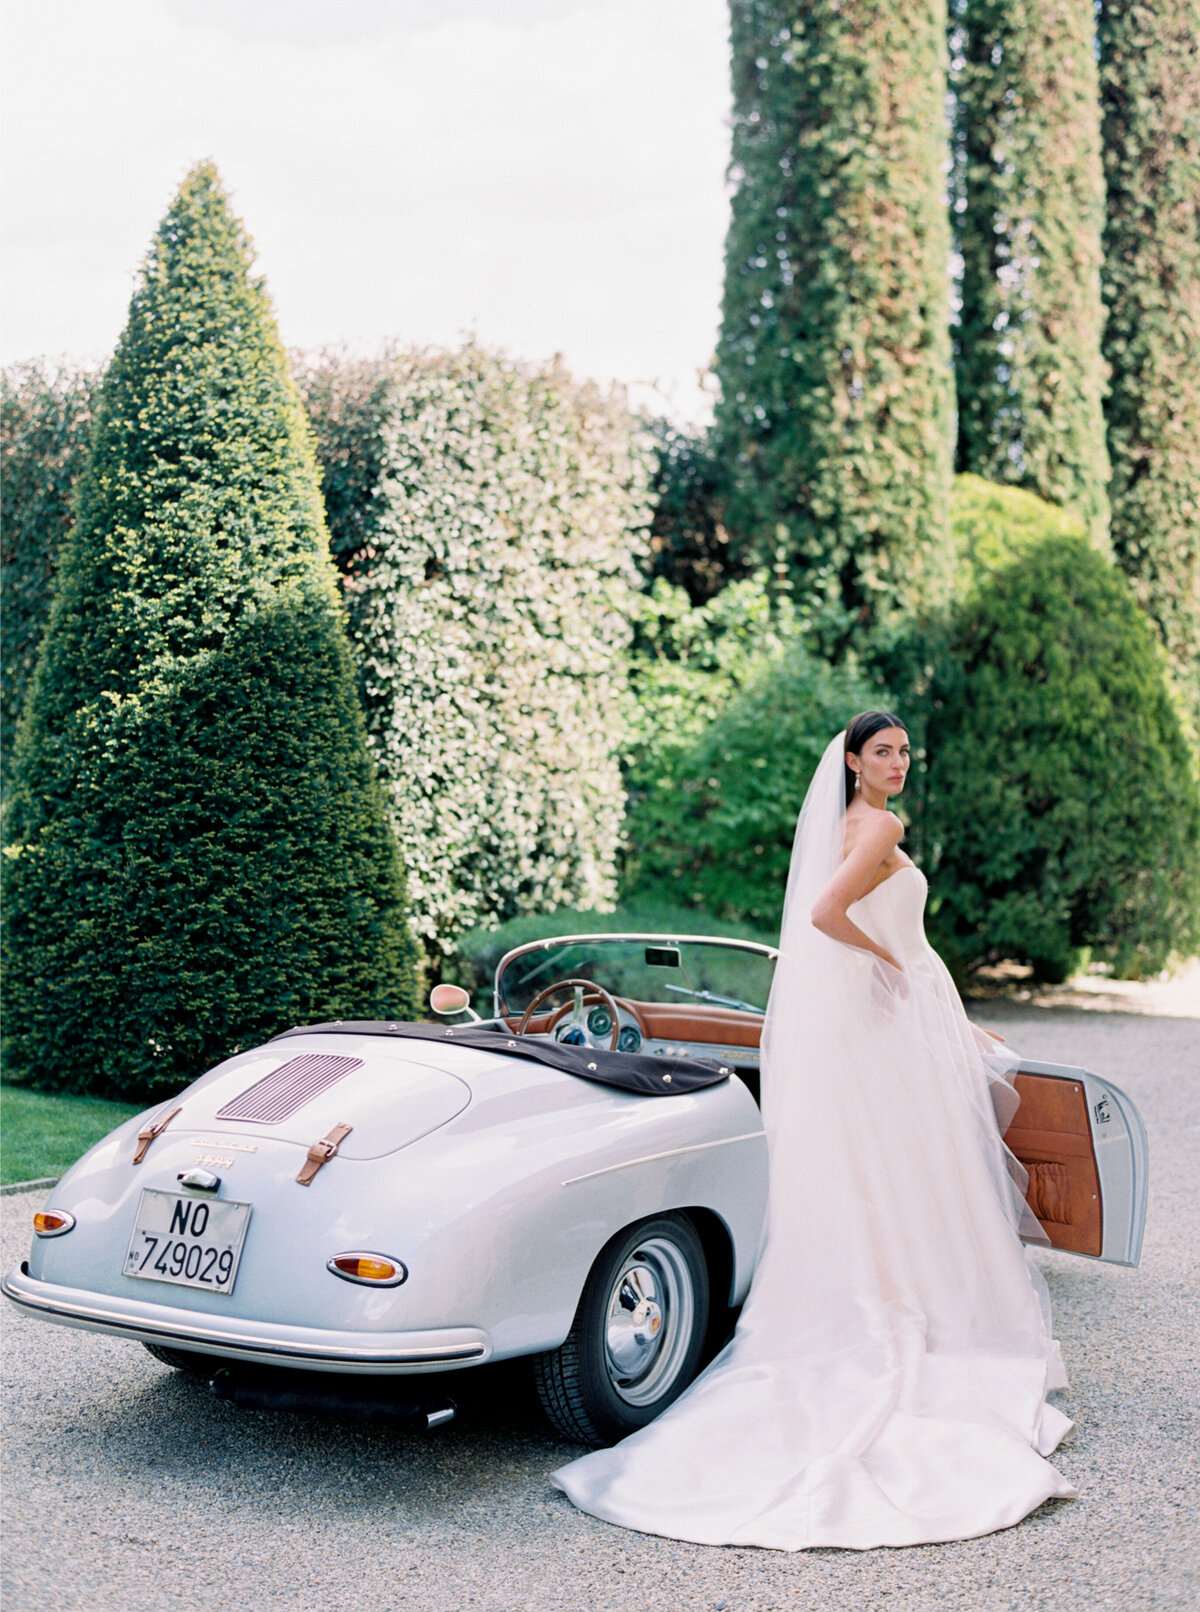 Vintage car parked in front of Villa Balbiano for a wedding ceremony